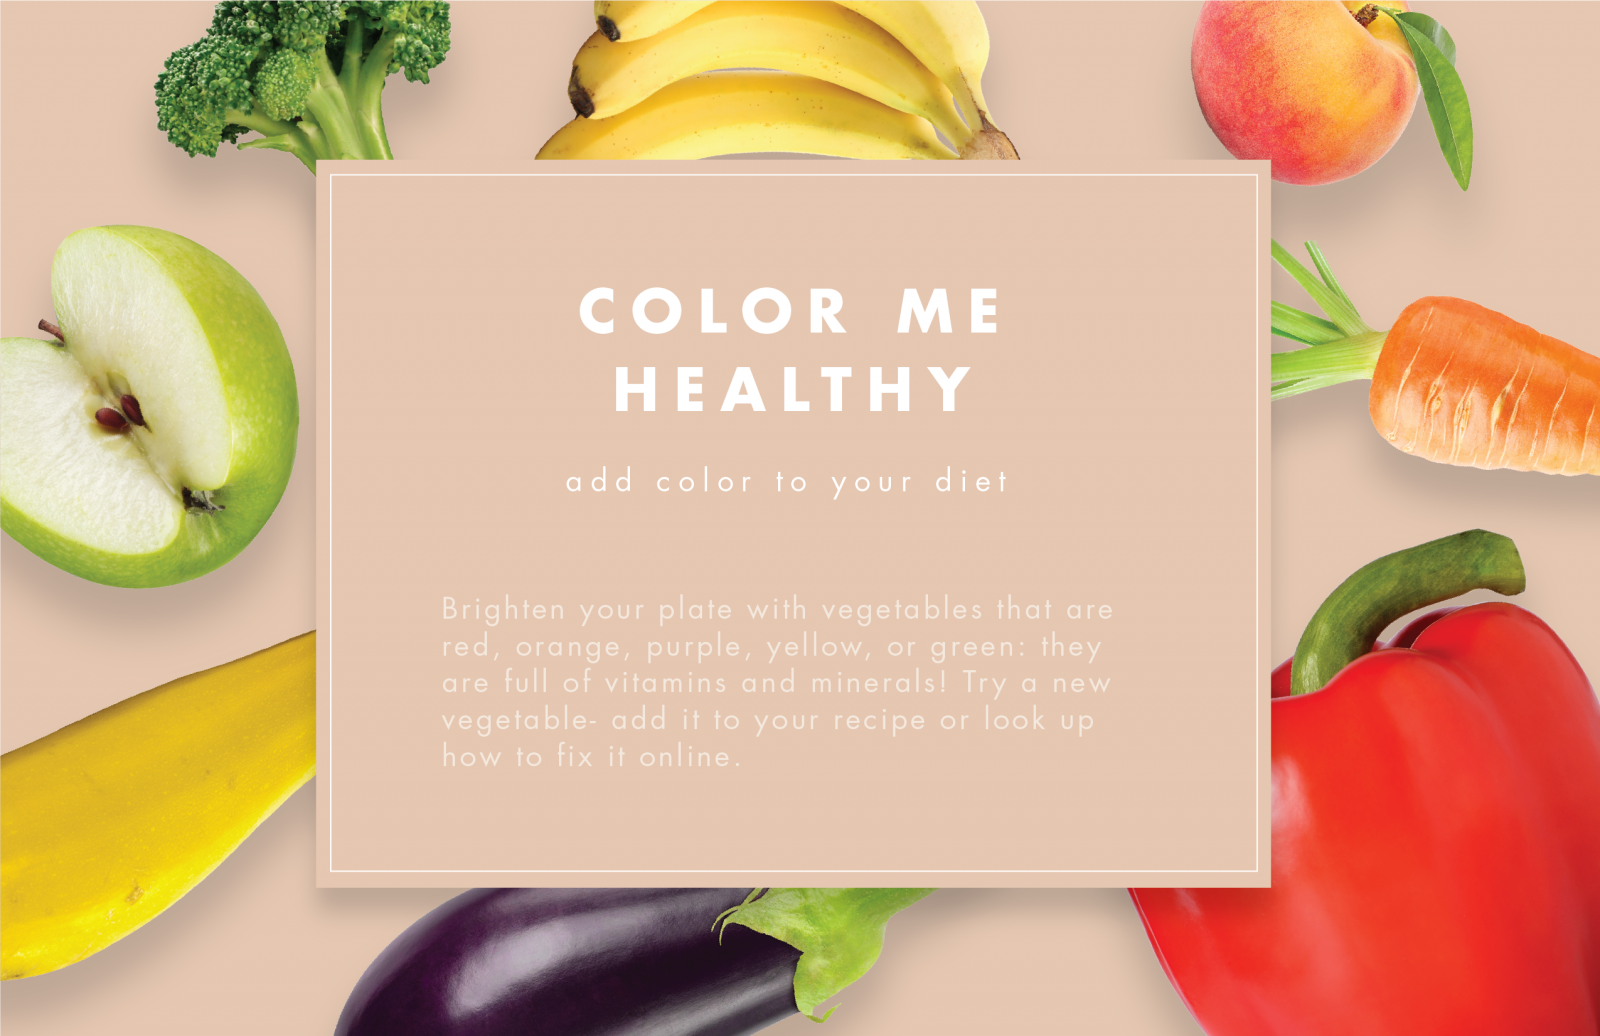 colormehealthy2-07